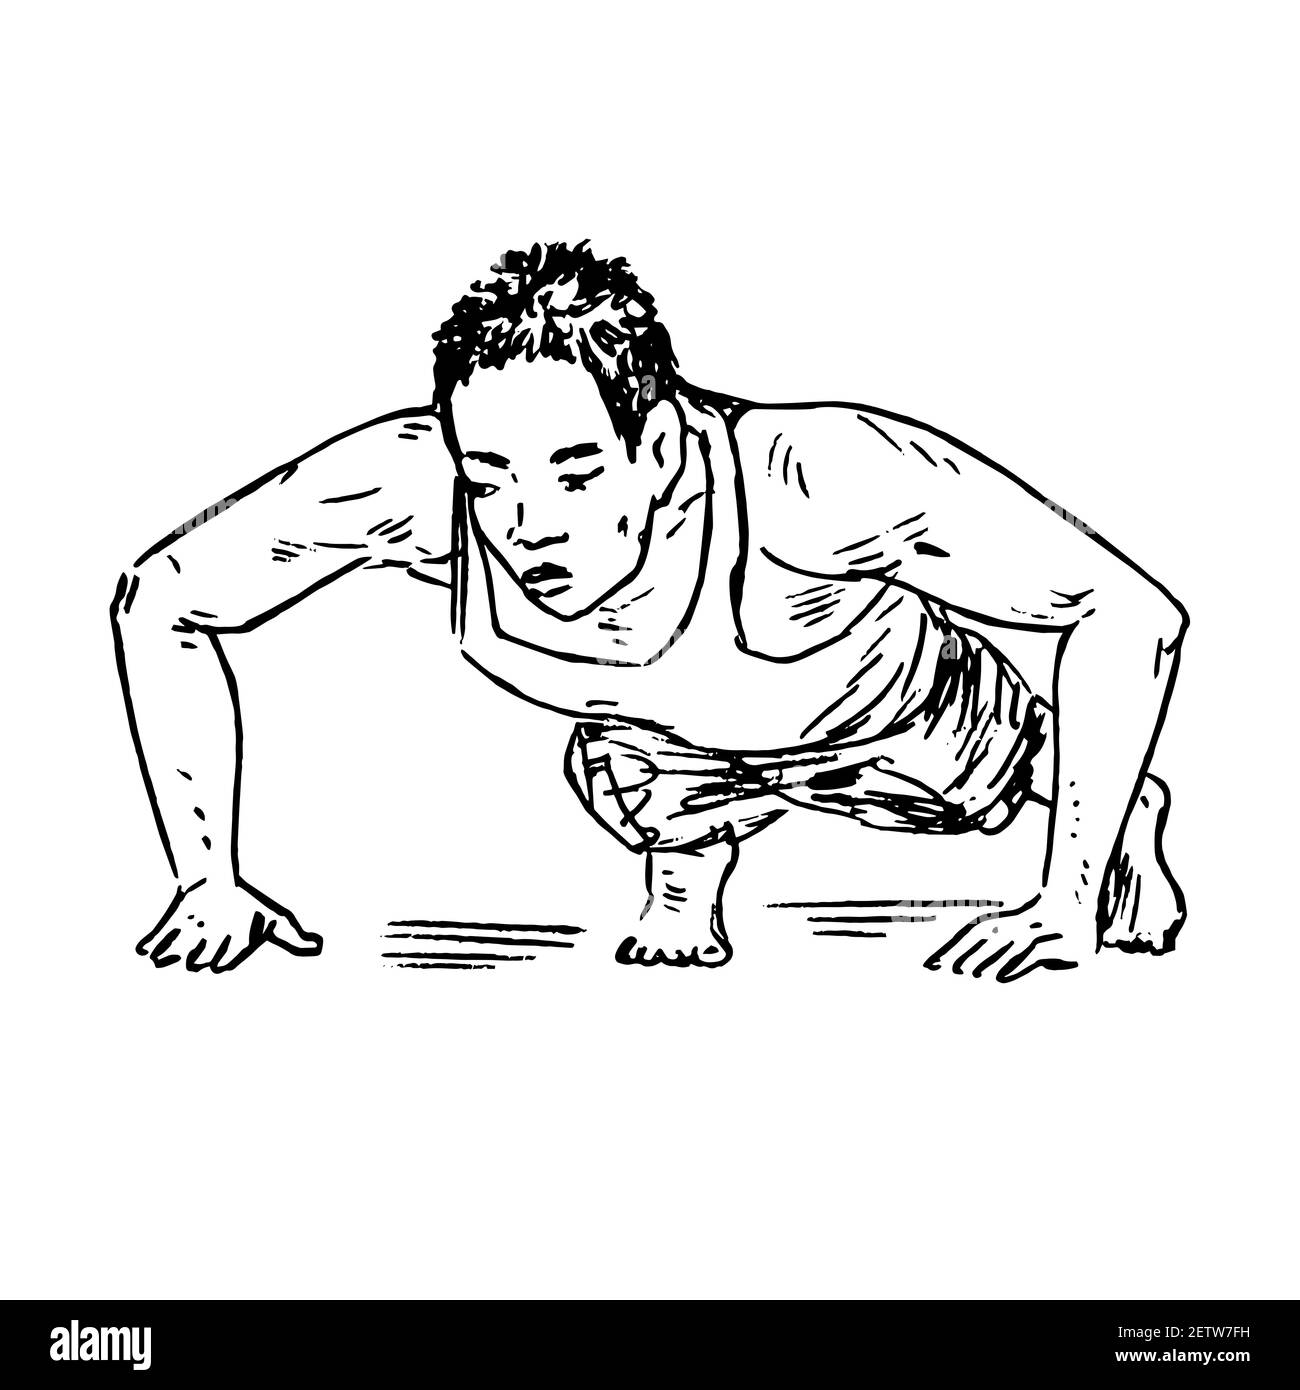 Push-up workout, man front view, hand drawn doodle, drawing in gravure style, sketch illustration Stock Photo